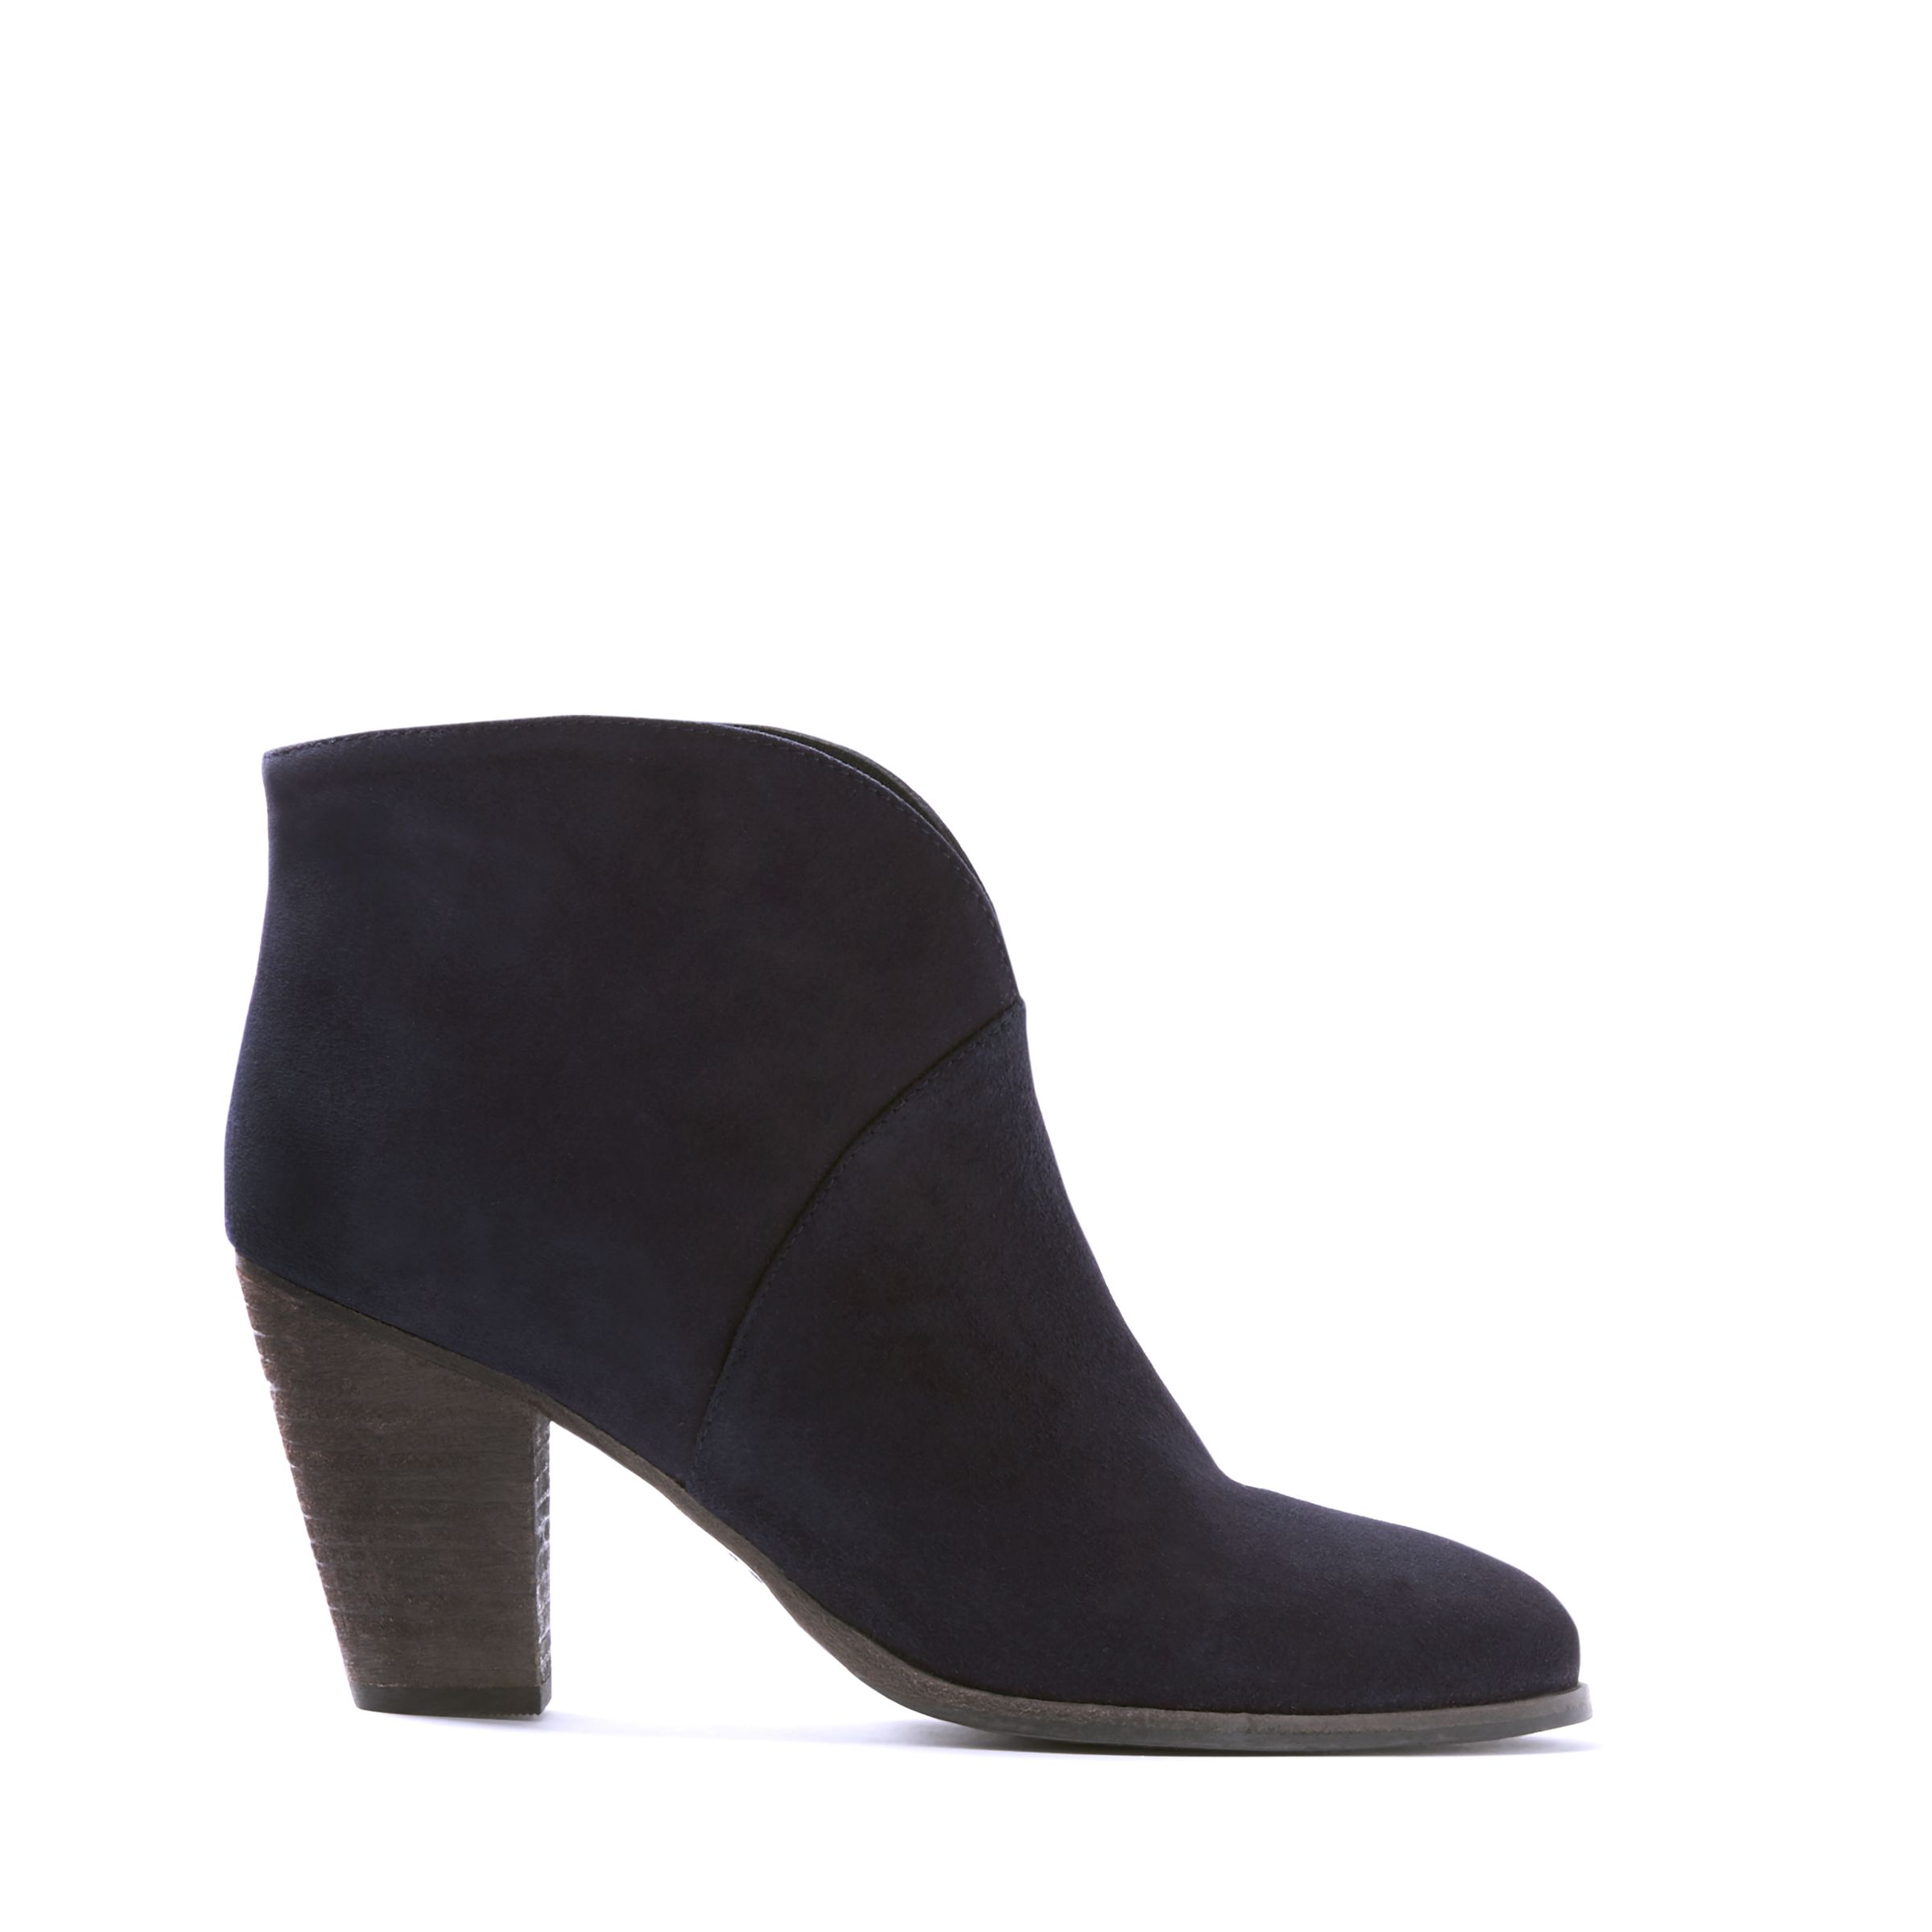 Boden Marlow Block Heeled Ankle Boots at John Lewis & Partners